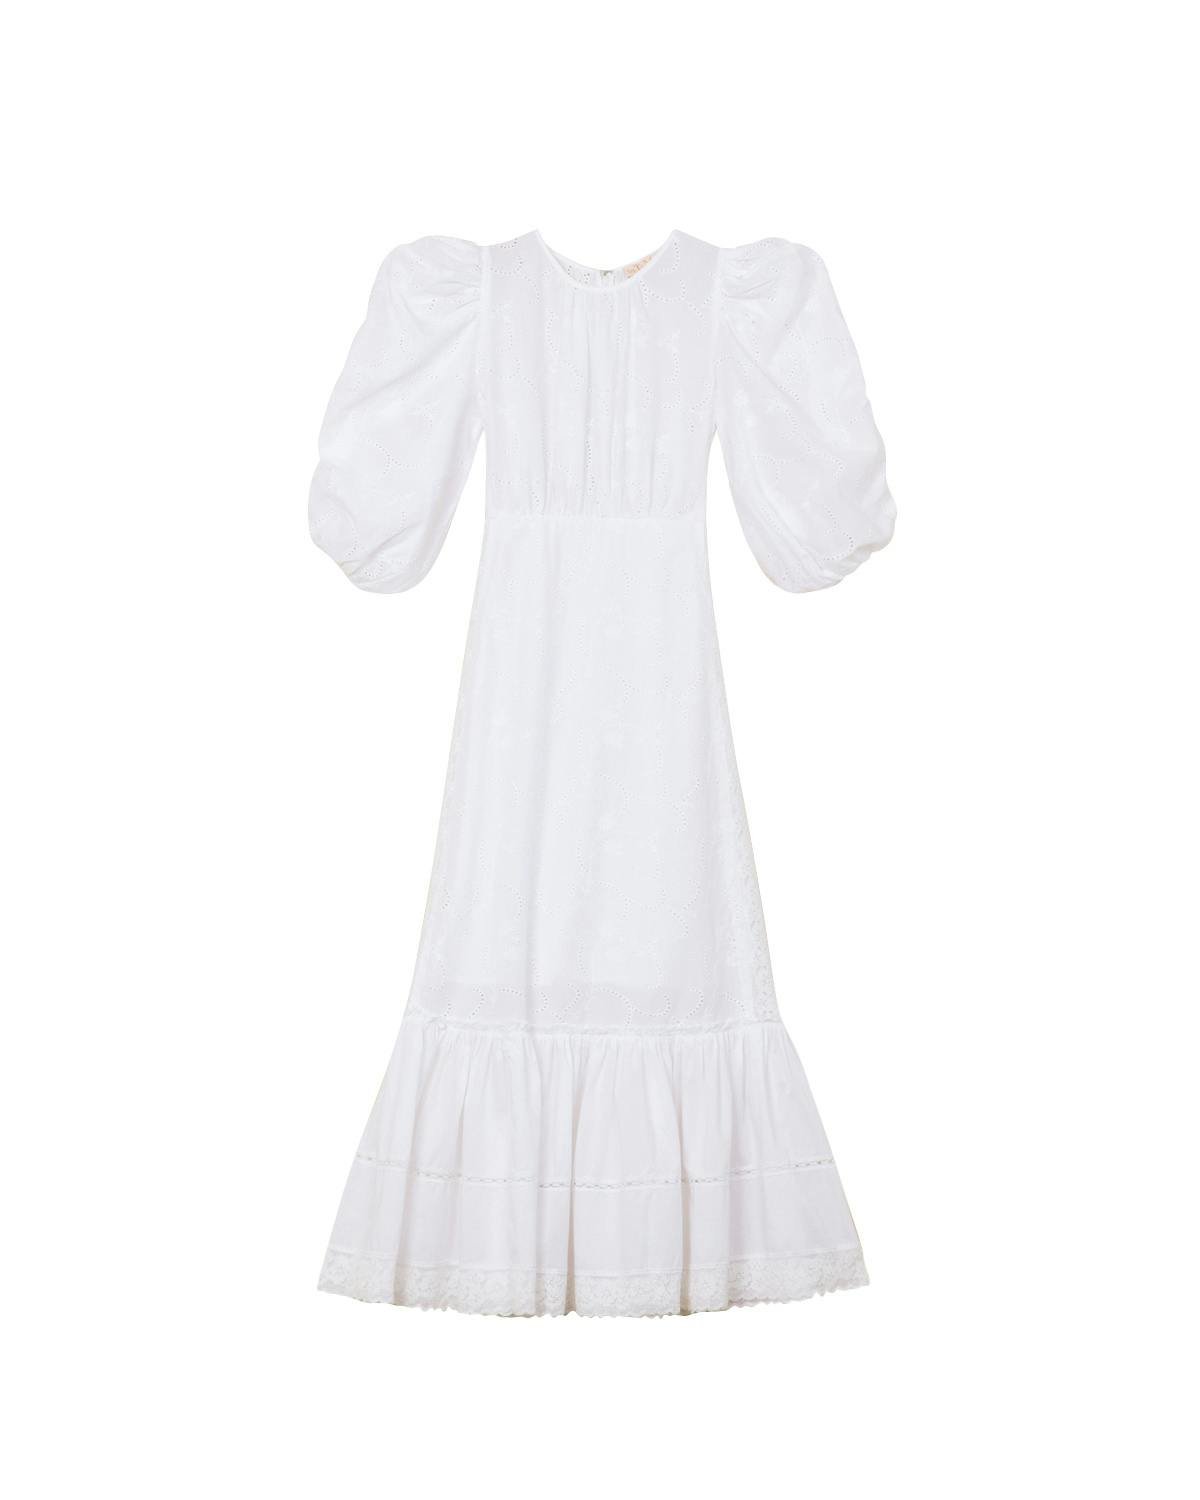 Broderie Anglaise Gown, White. Image #6